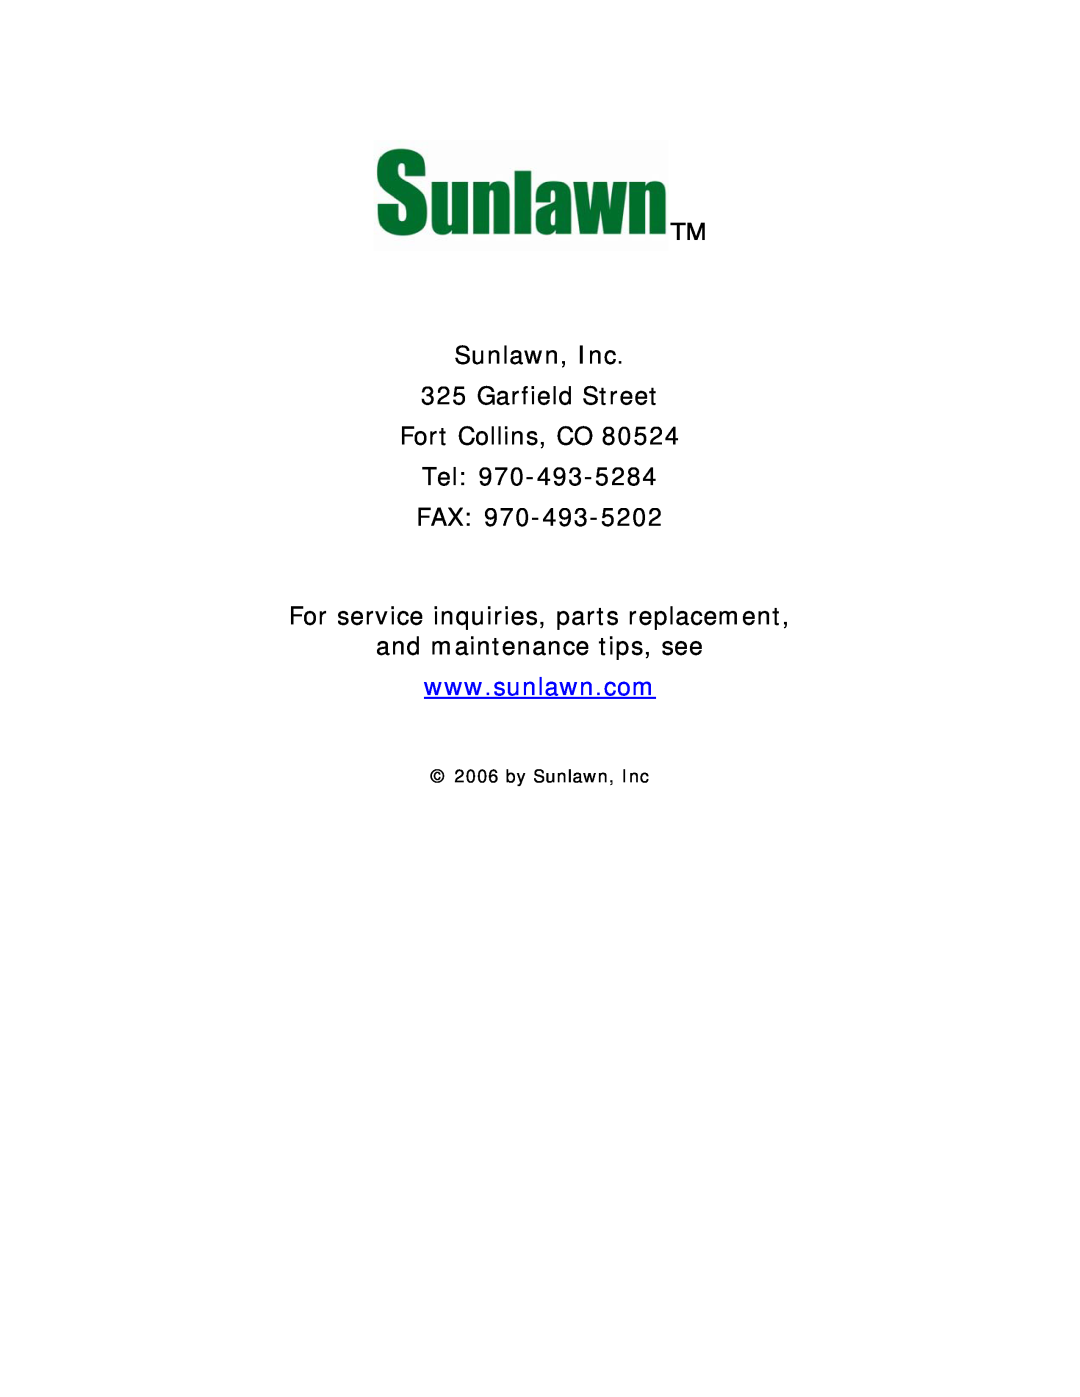 Reel Mowers, Etc MM-1 Sunlawn, Inc 325 Garfield Street Fort Collins, CO, Tel FAX, For service inquiries, parts replacement 